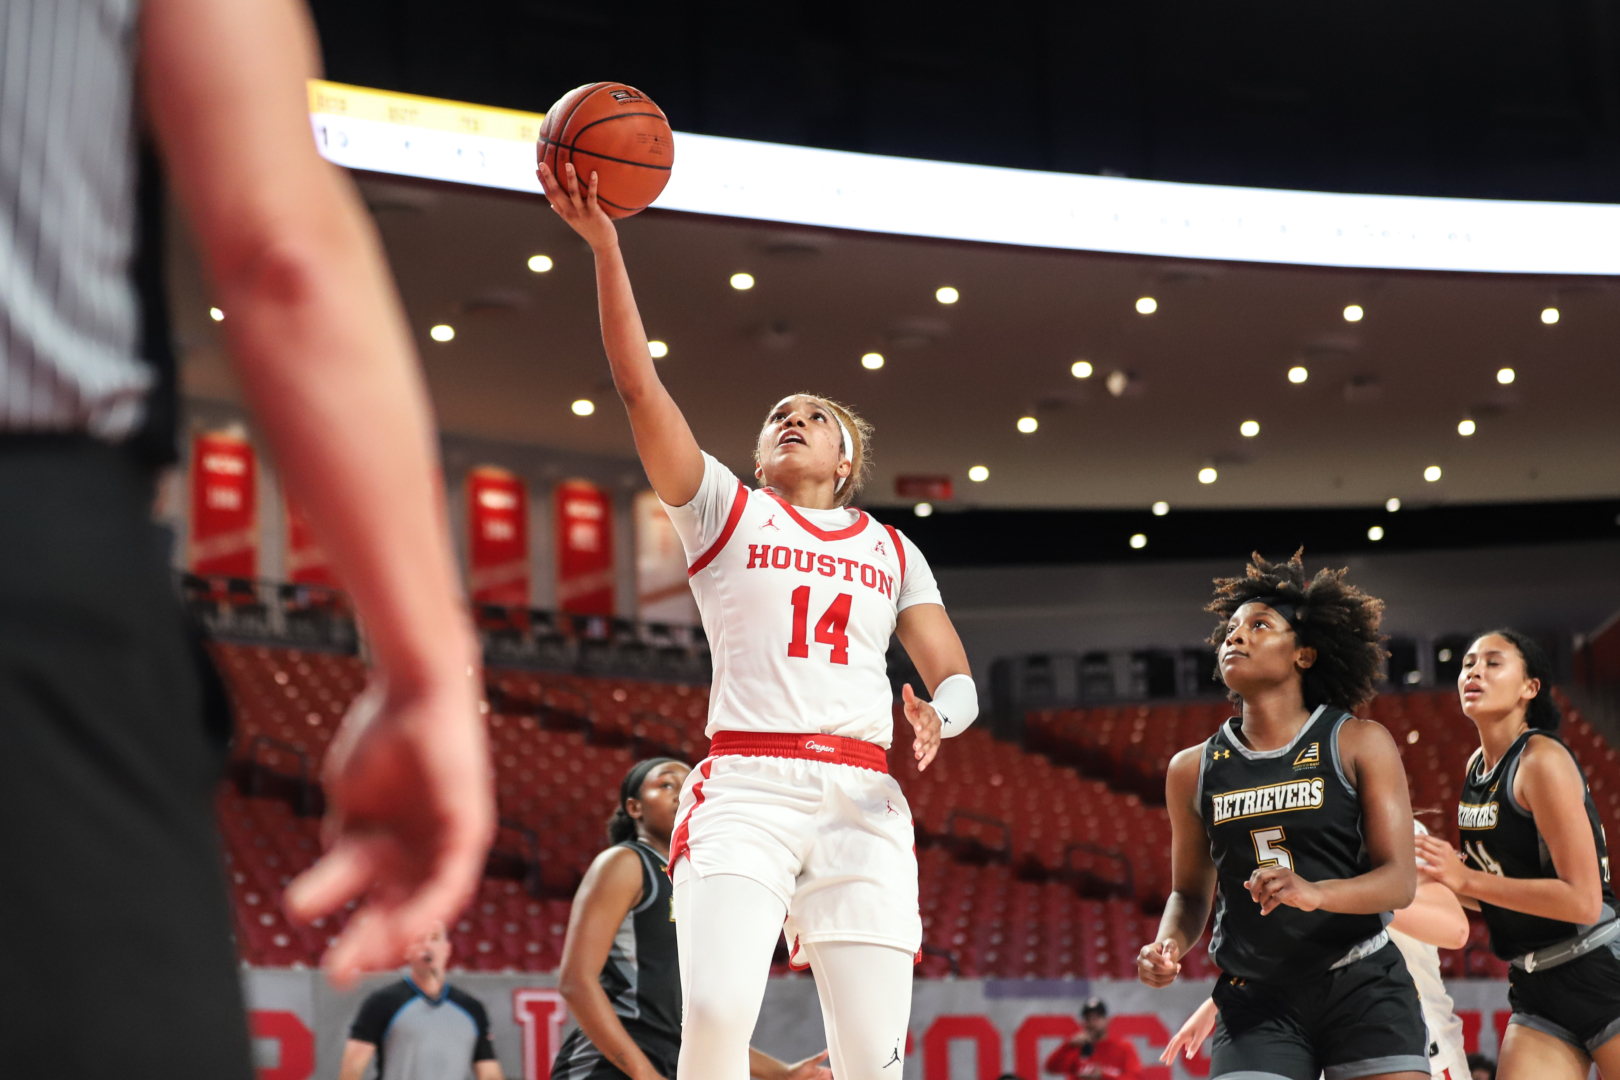 Junior guard Laila Blair led UH women's basketball with 13 points in the win over UMBC. | Sean Thomas/The Cougar